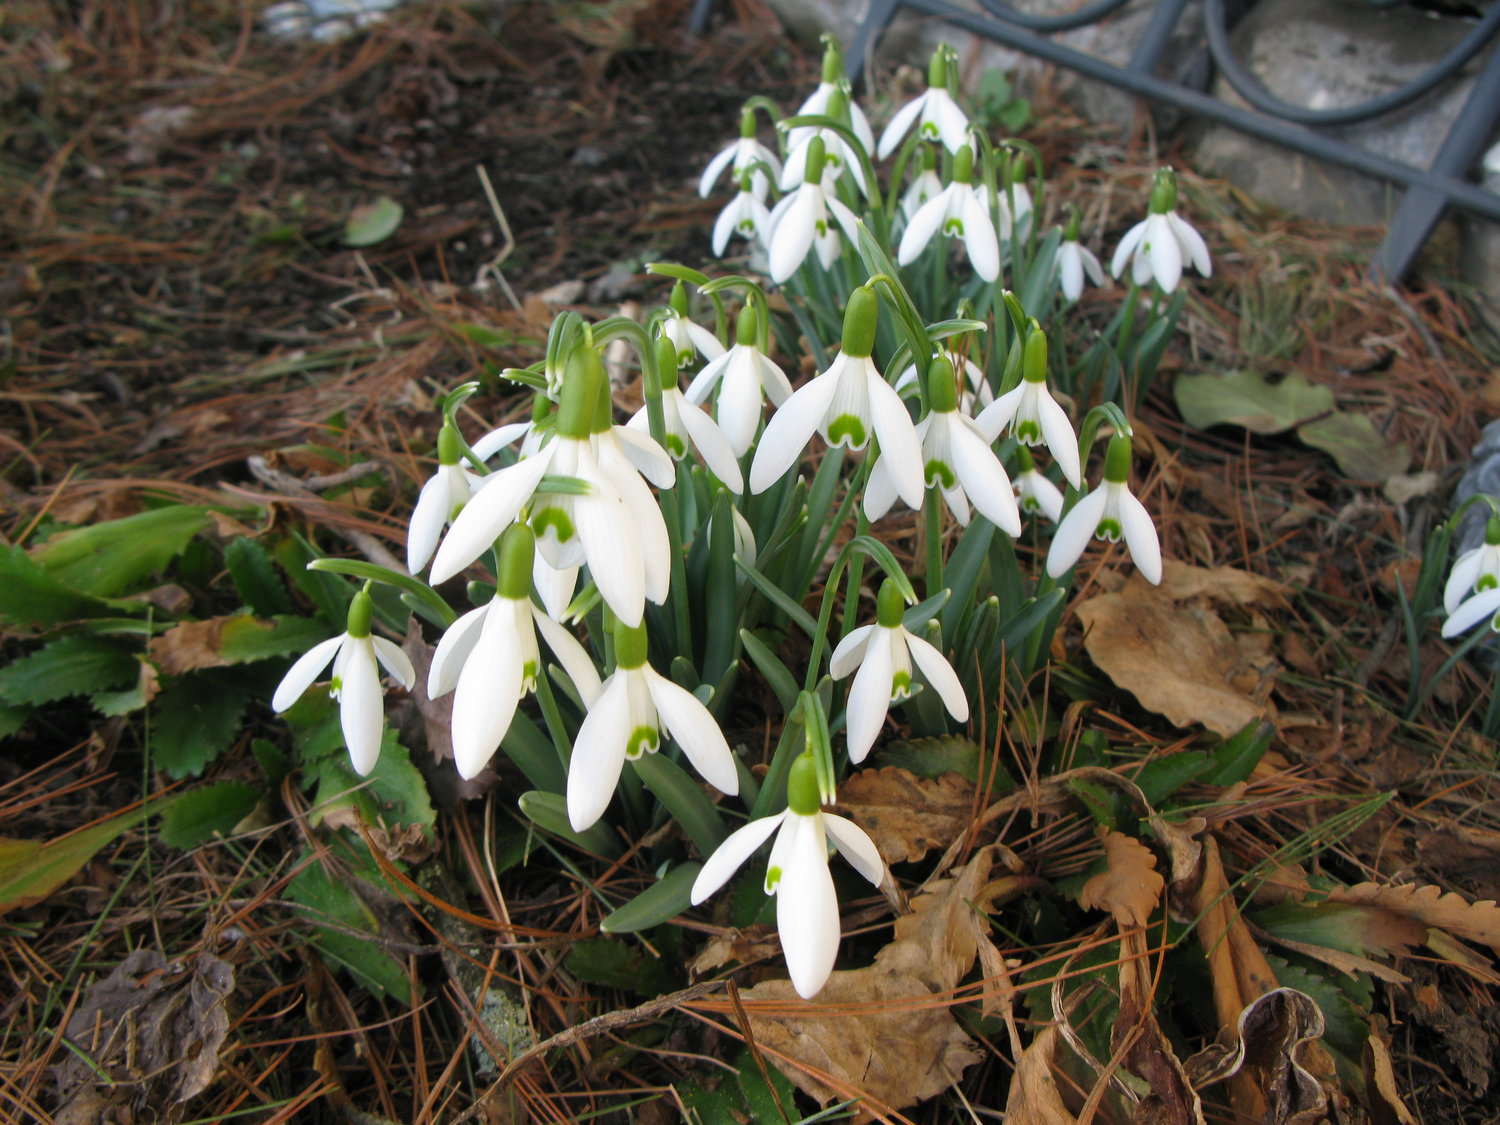 Snowdrops are the first flowers of spring and the sign of a coming trout season.